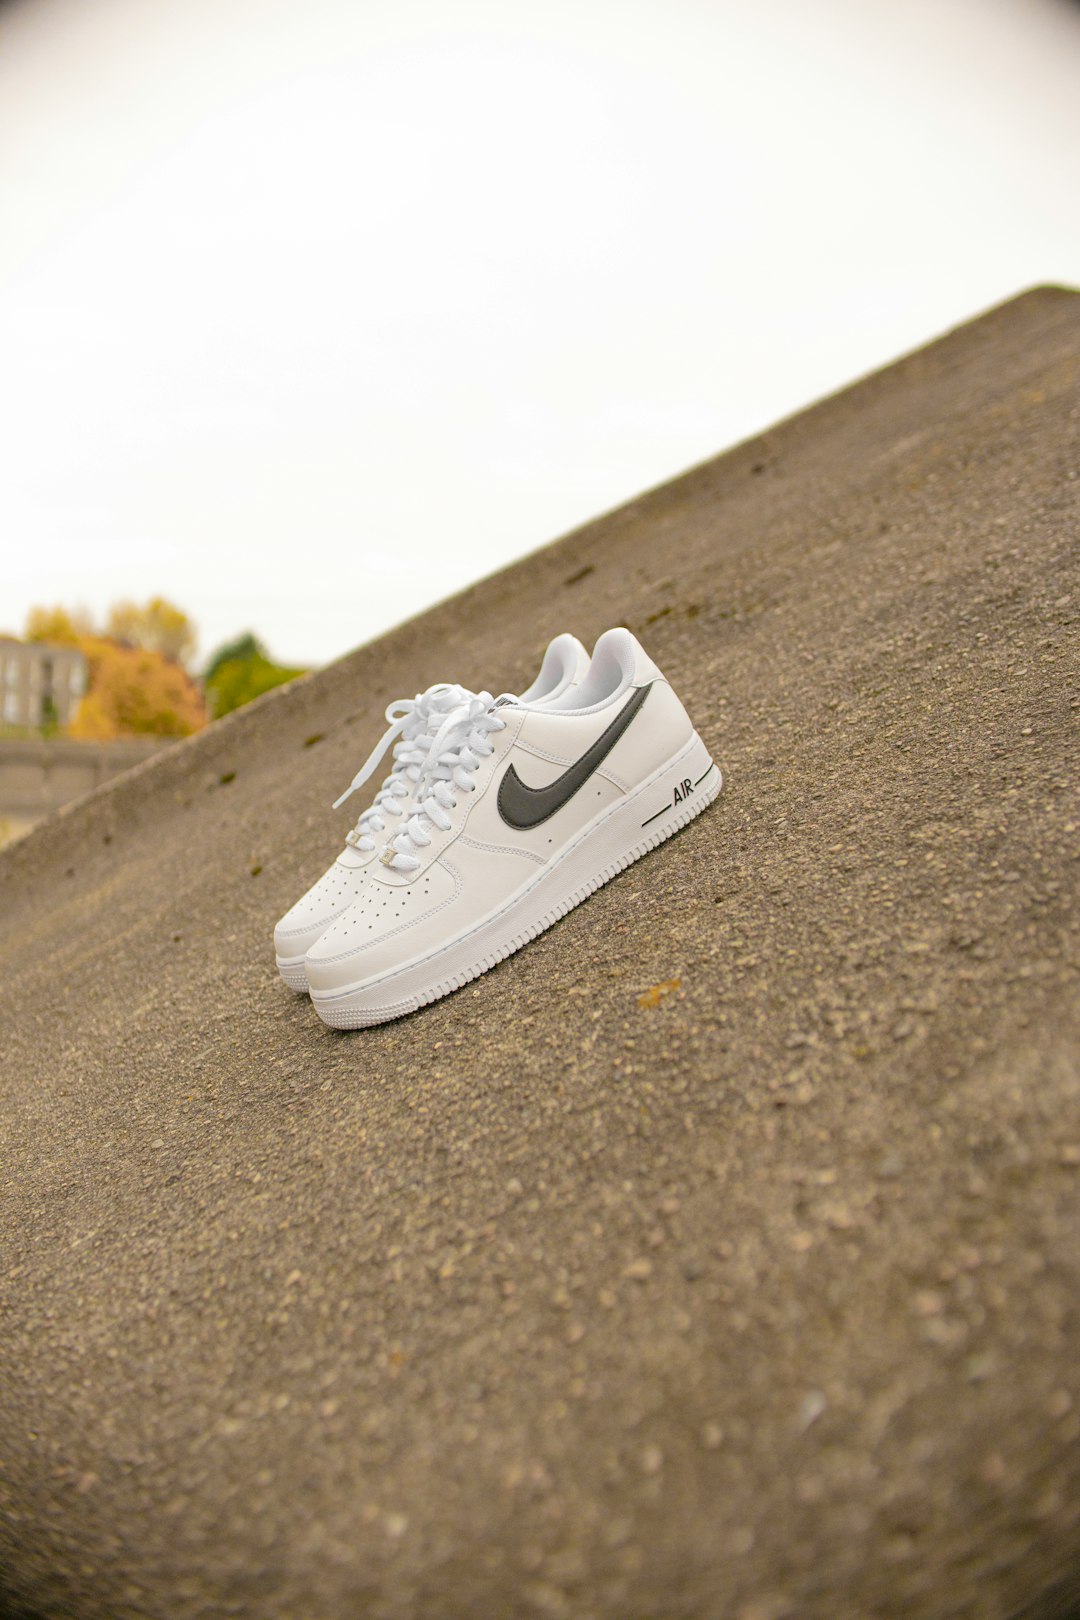 white nike air force 1 low on gray asphalt road during daytime